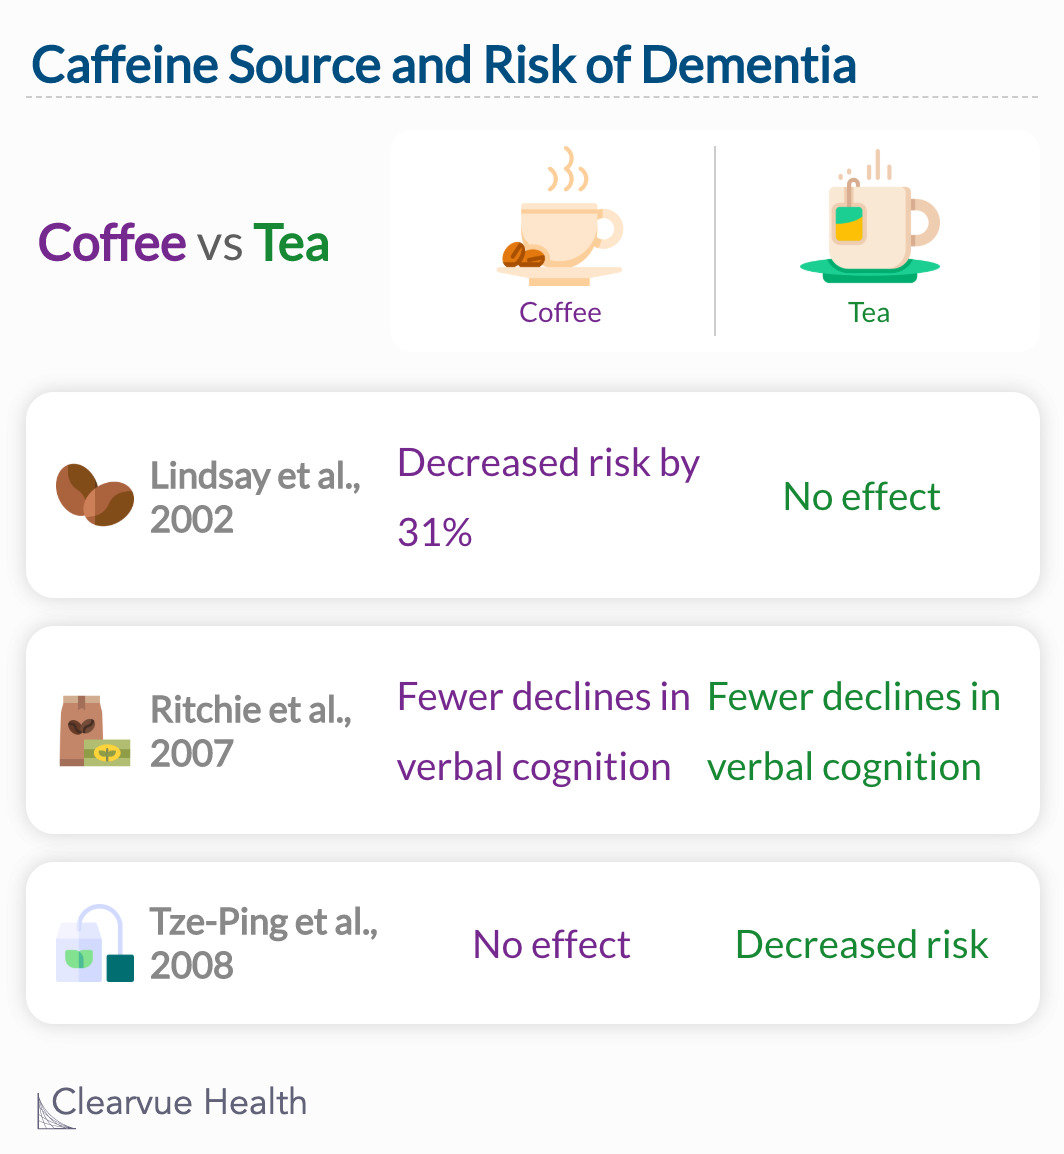  Including the CAIDE study above, 5 studies found significant associations between caffeinated drinks and cognitive decline. 